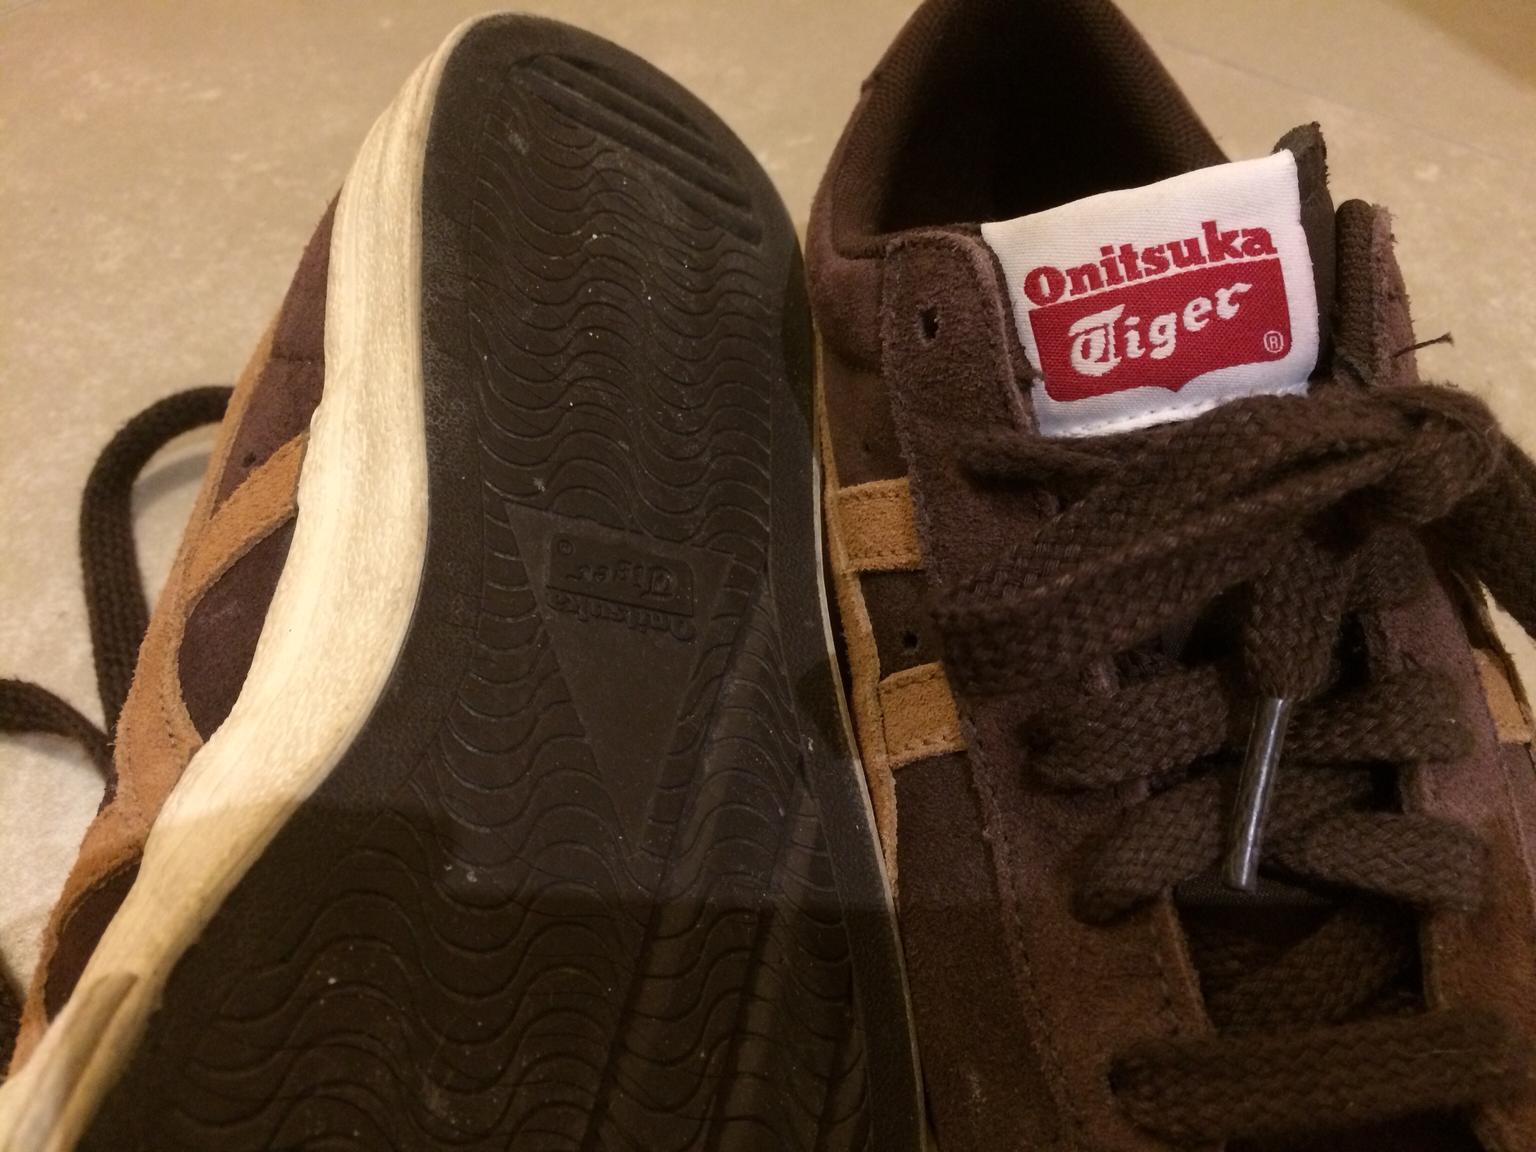 Onitsuka Tiger n.37 in 20129 Milano for €22.00 for sale | Shpock